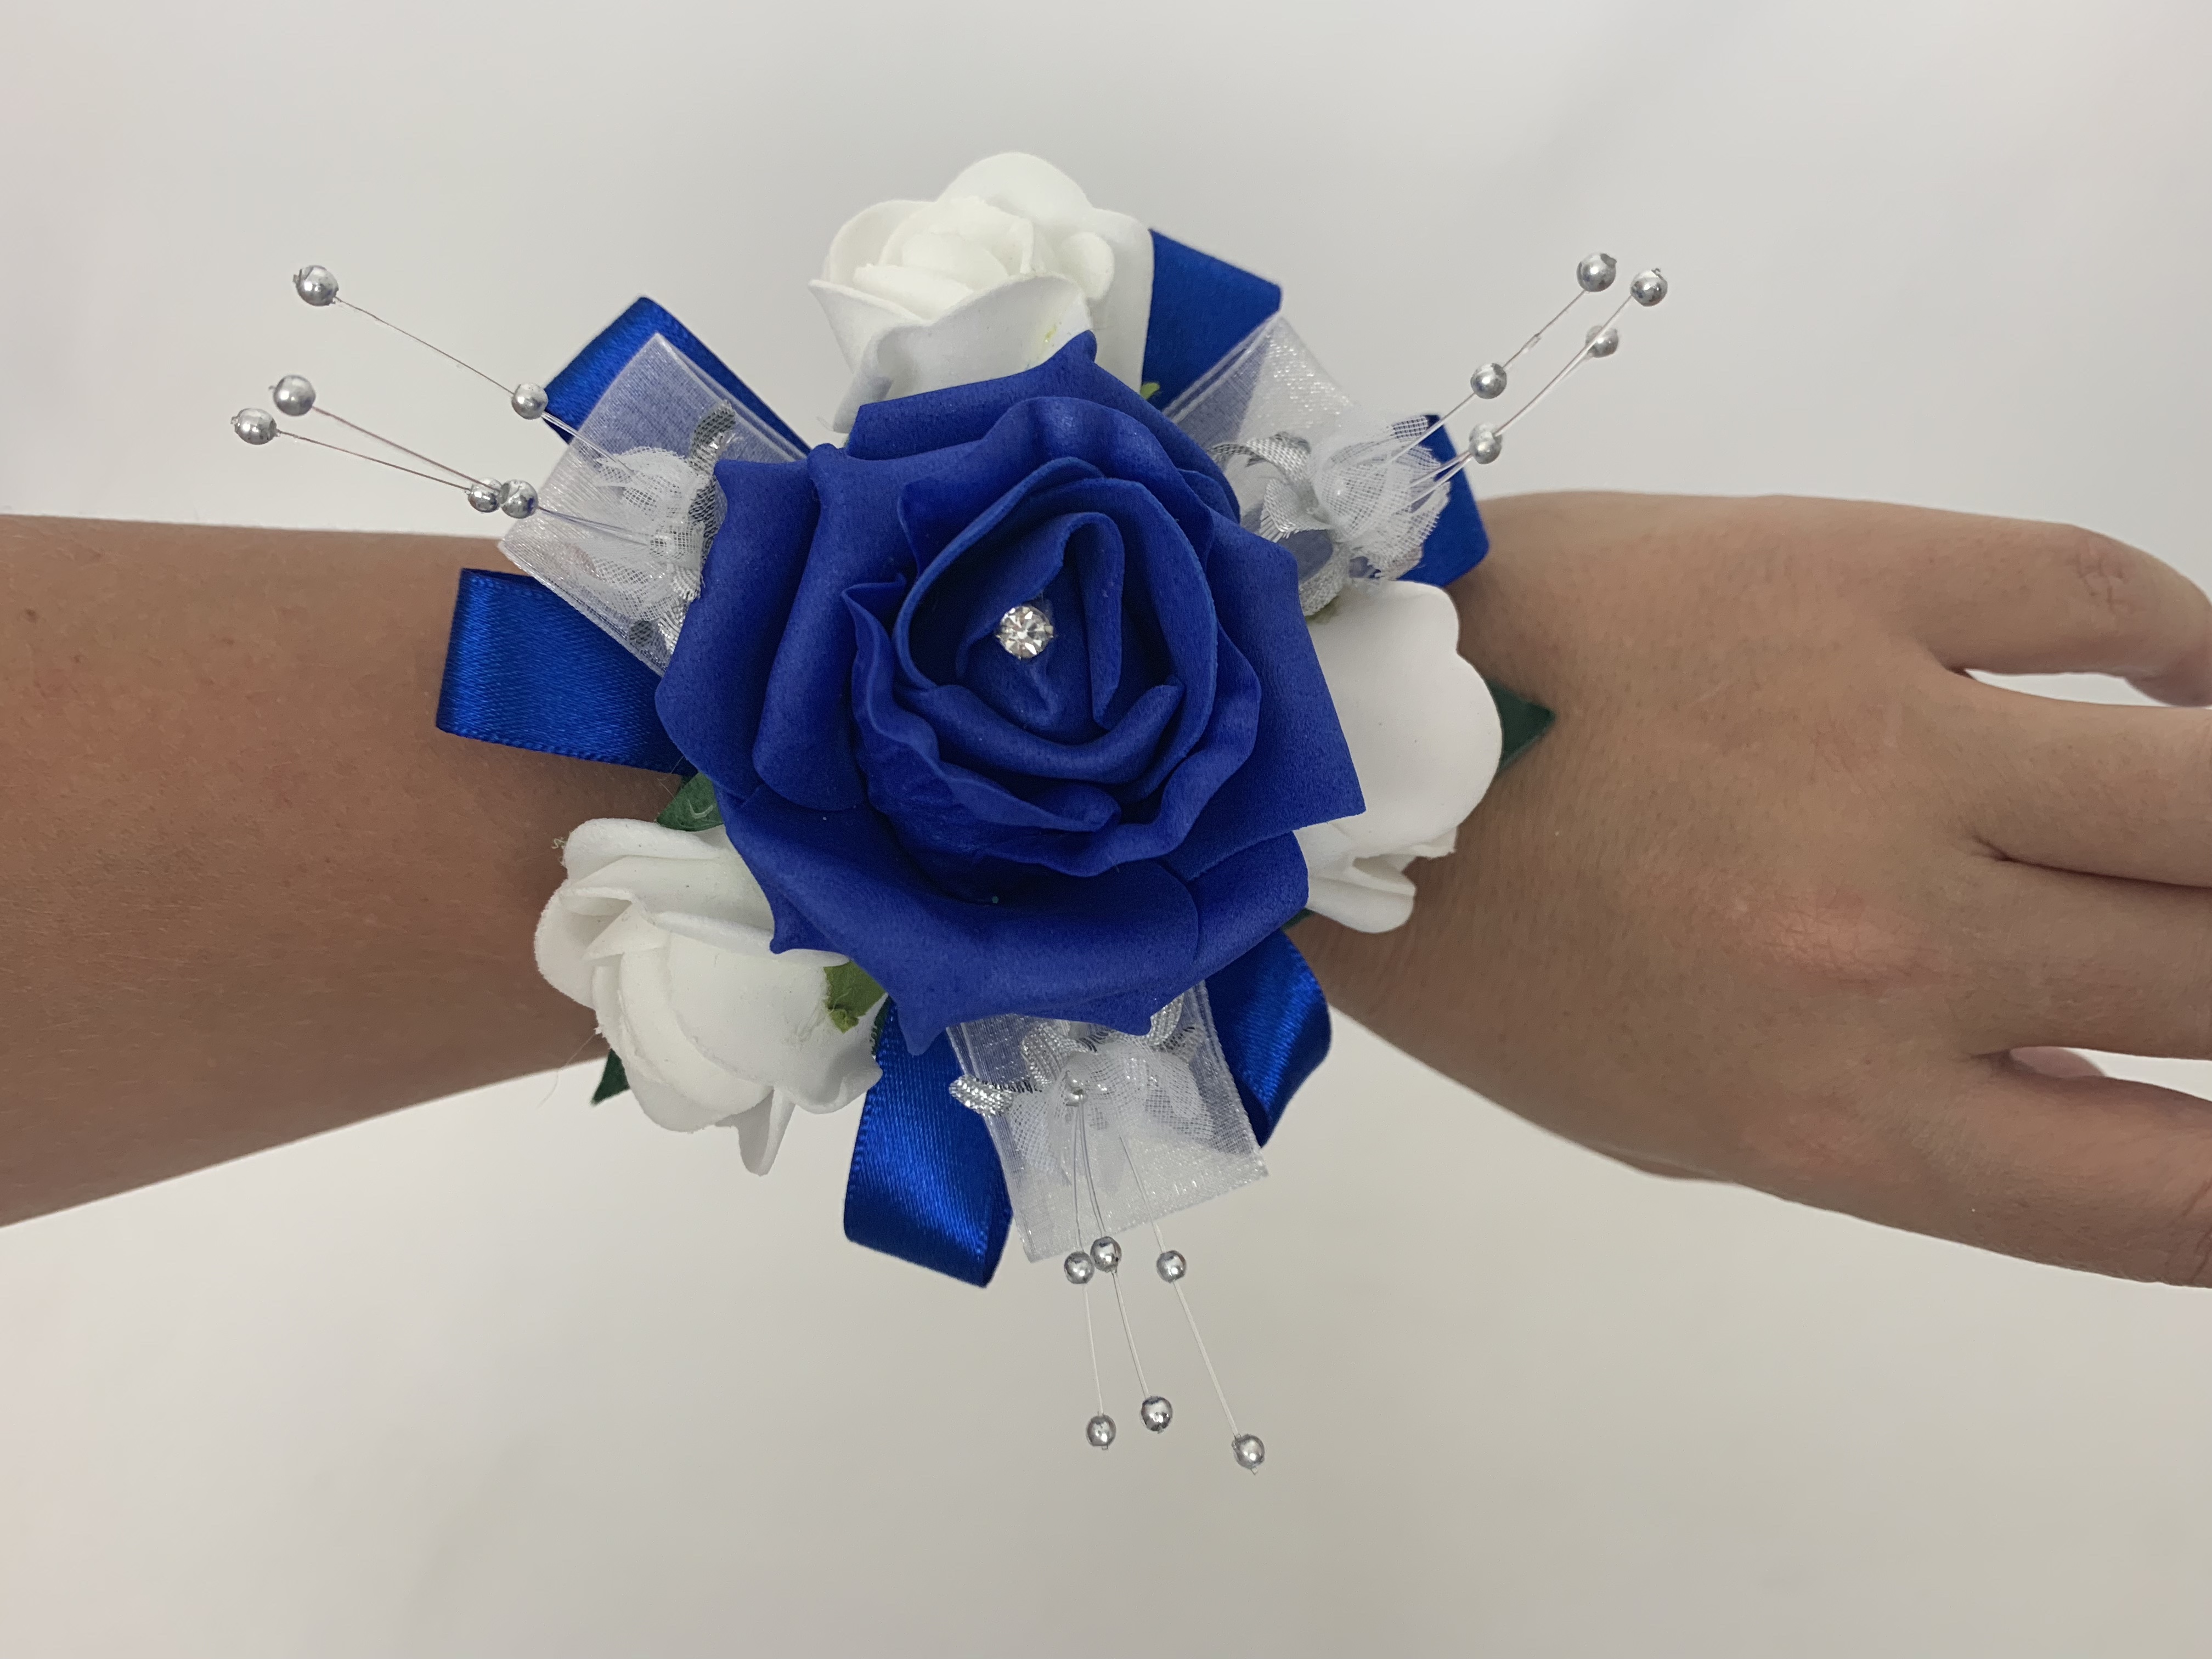 How to Make a Corsage - DIY Prom Corsage Step-by-Step